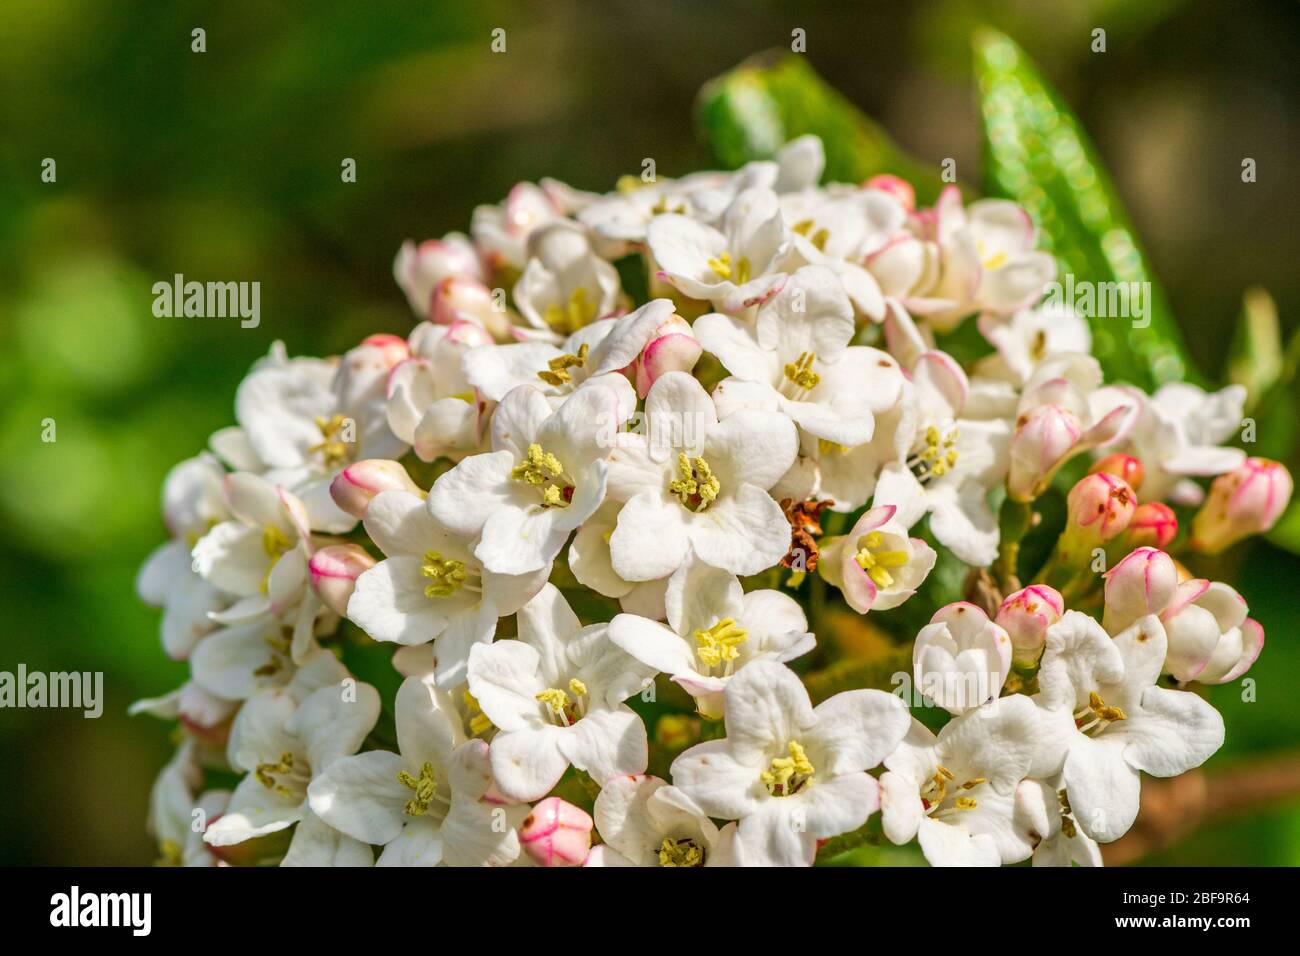 Close up of the flowers of Viburnum burkwoodii, a highly scented shrub, in a garden setting Stock Photo